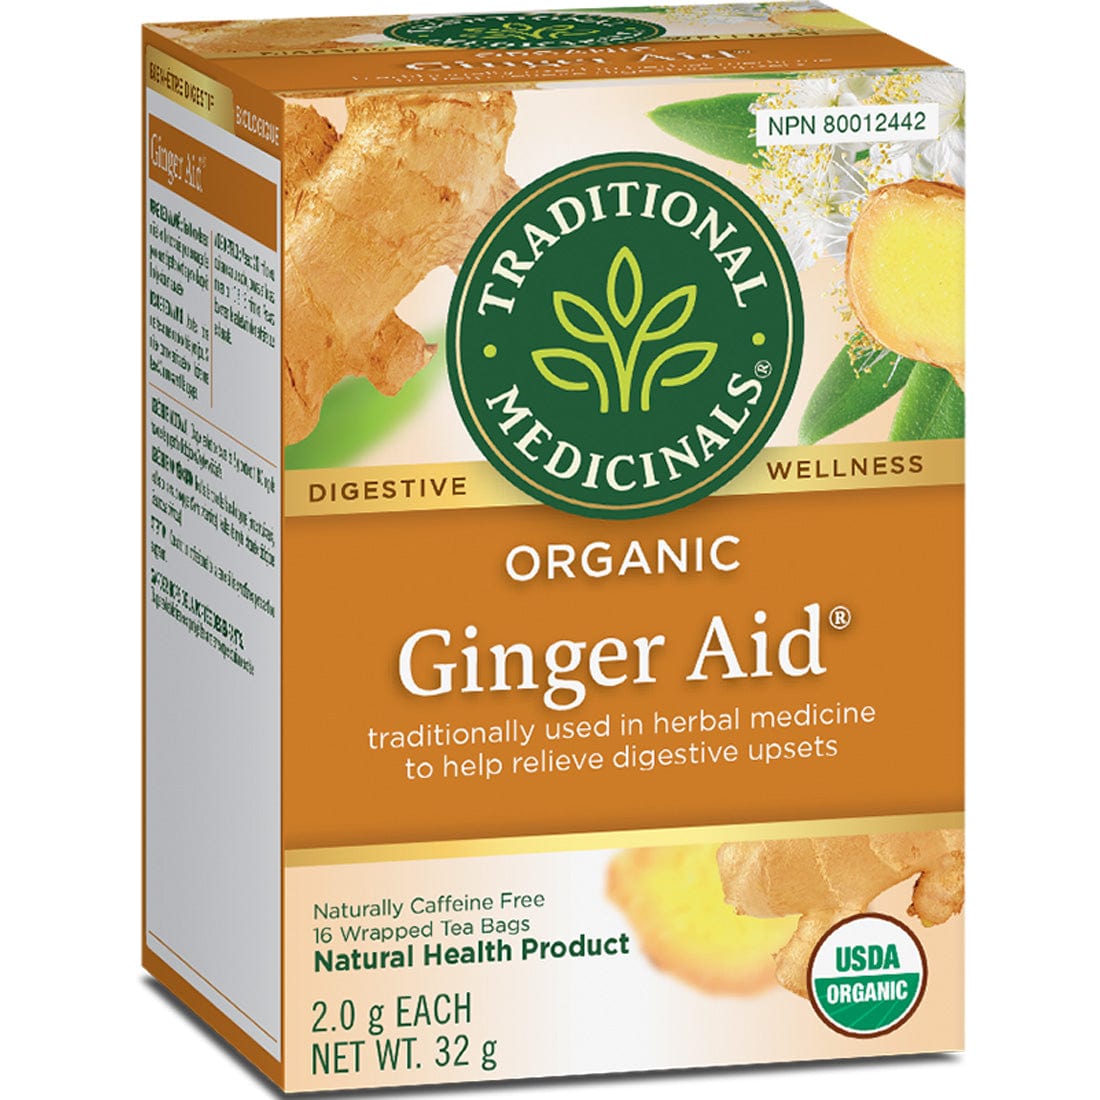 Traditional Medicinals Organic Ginger Aid Tea, 16 Wrapped Tea Bags